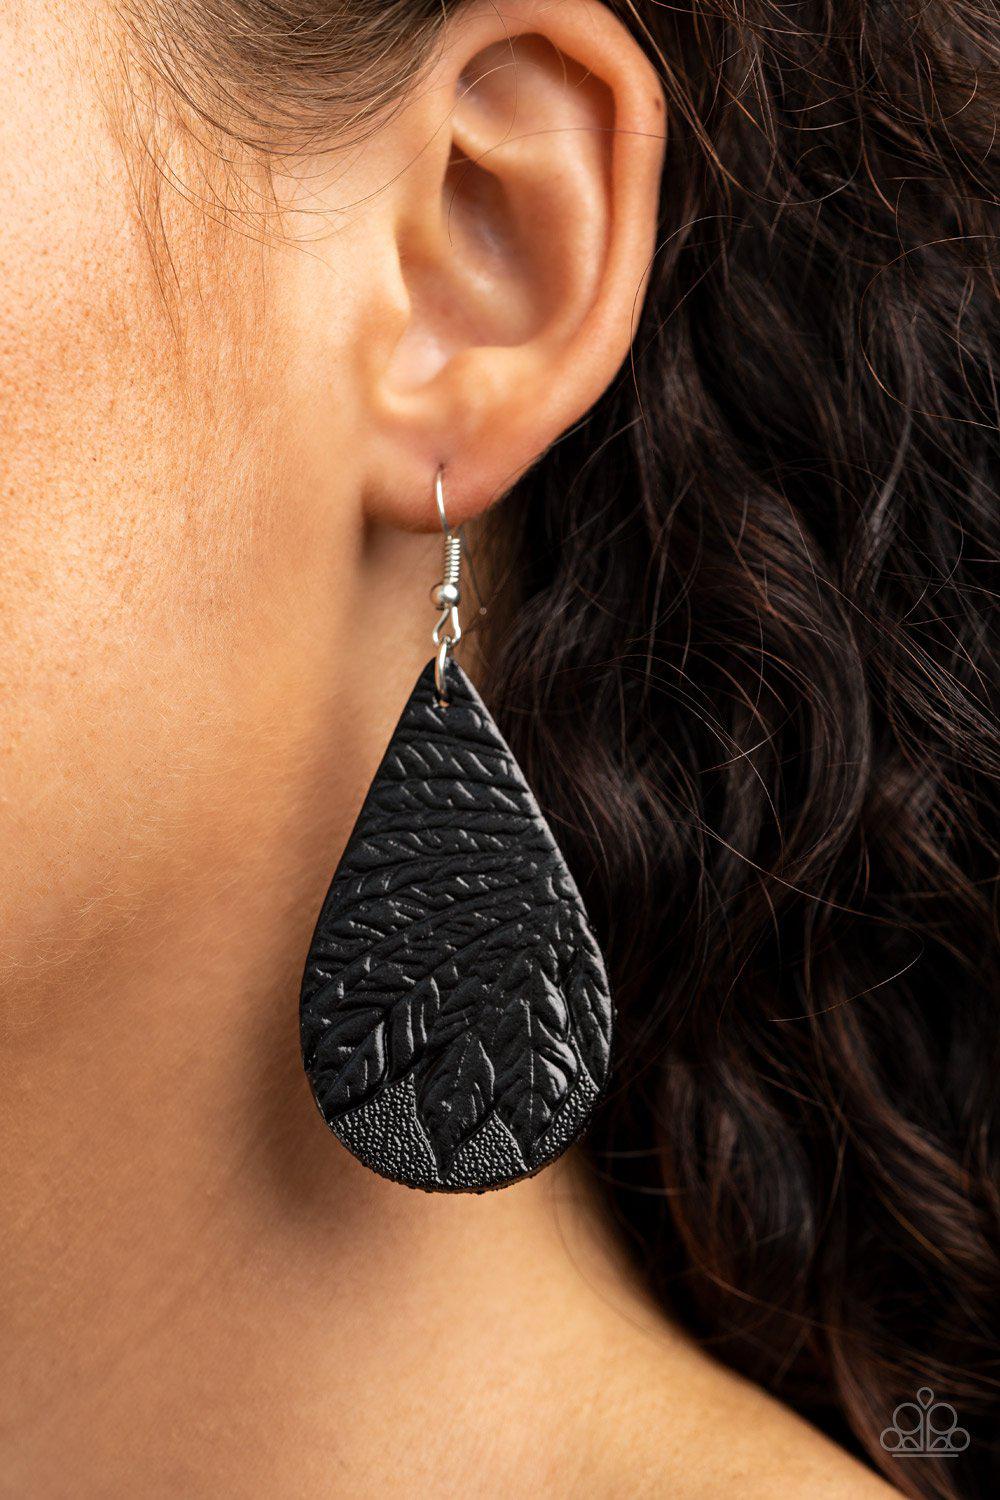 Everyone Remain PALM! Black Leather Earrings - Paparazzi Accessories - model -CarasShop.com - $5 Jewelry by Cara Jewels